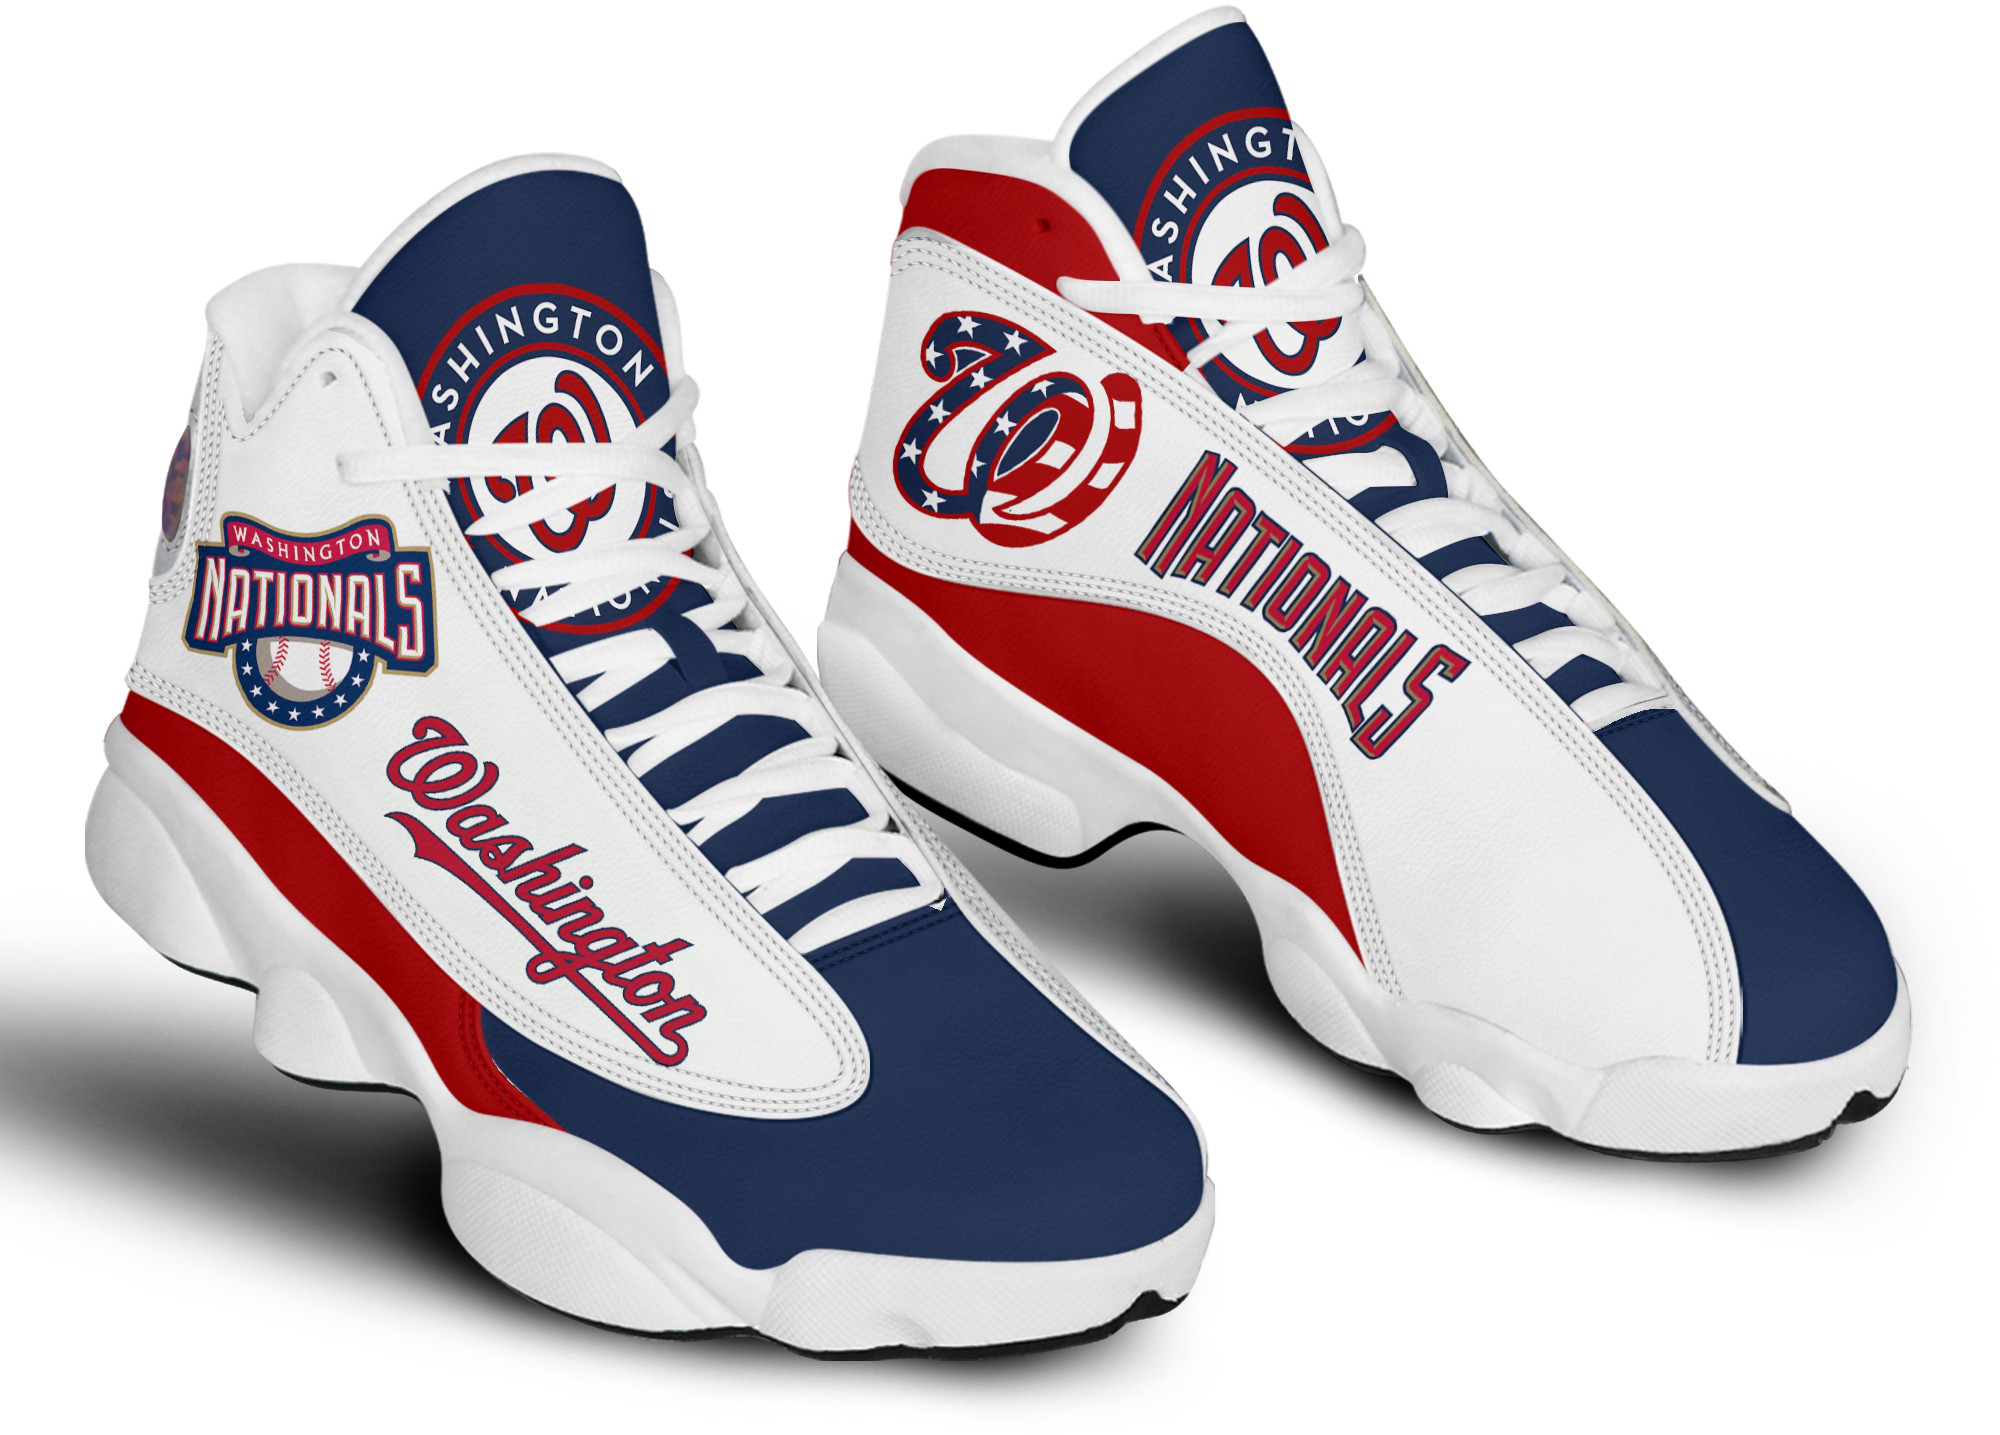 Women's Washington Nationals Limited Edition JD13 Sneakers 001